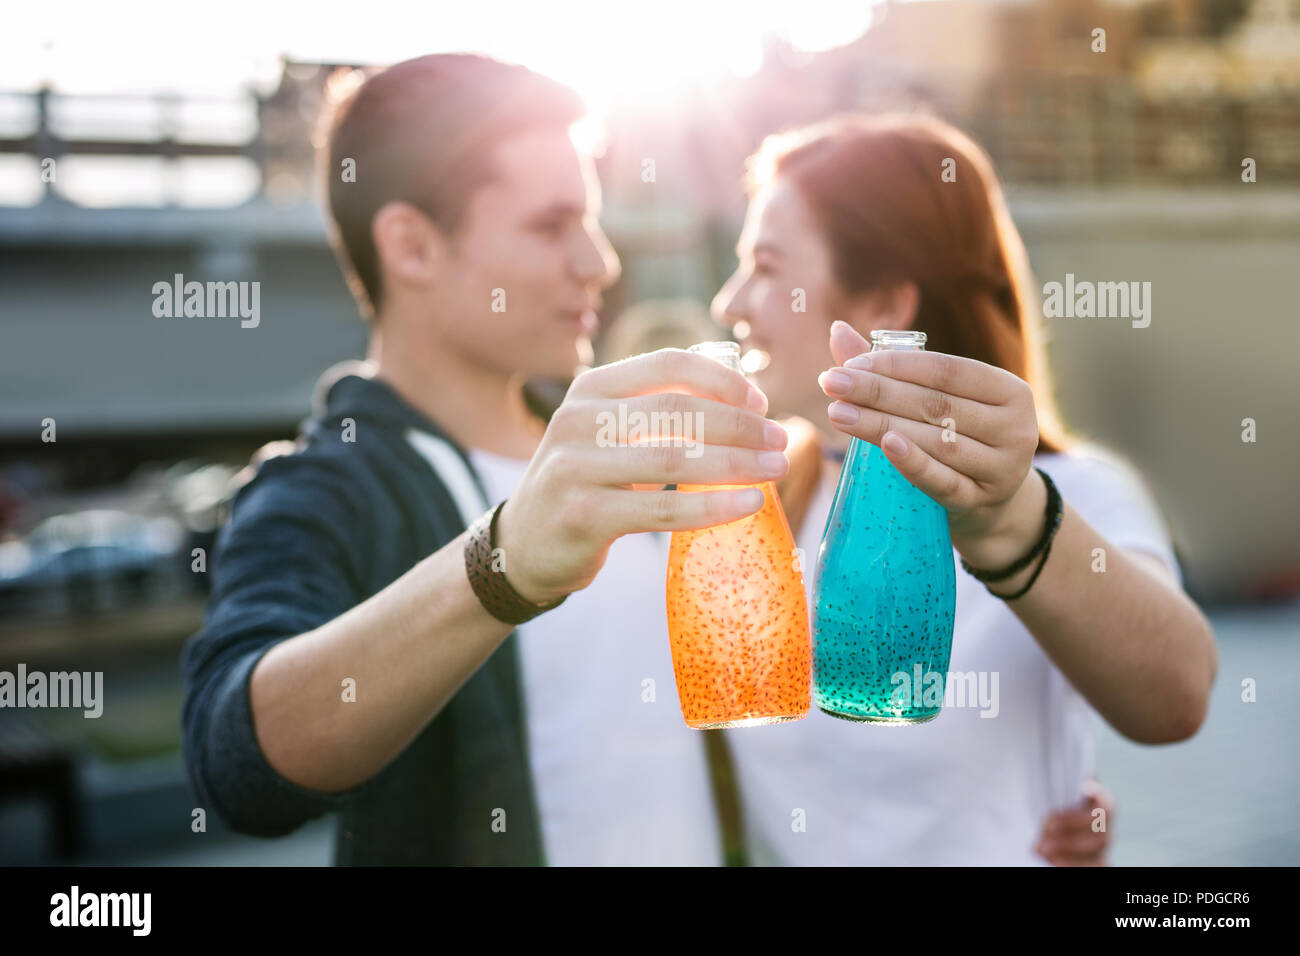 Bottles with drinks being in hands of joyful young people Stock Photo